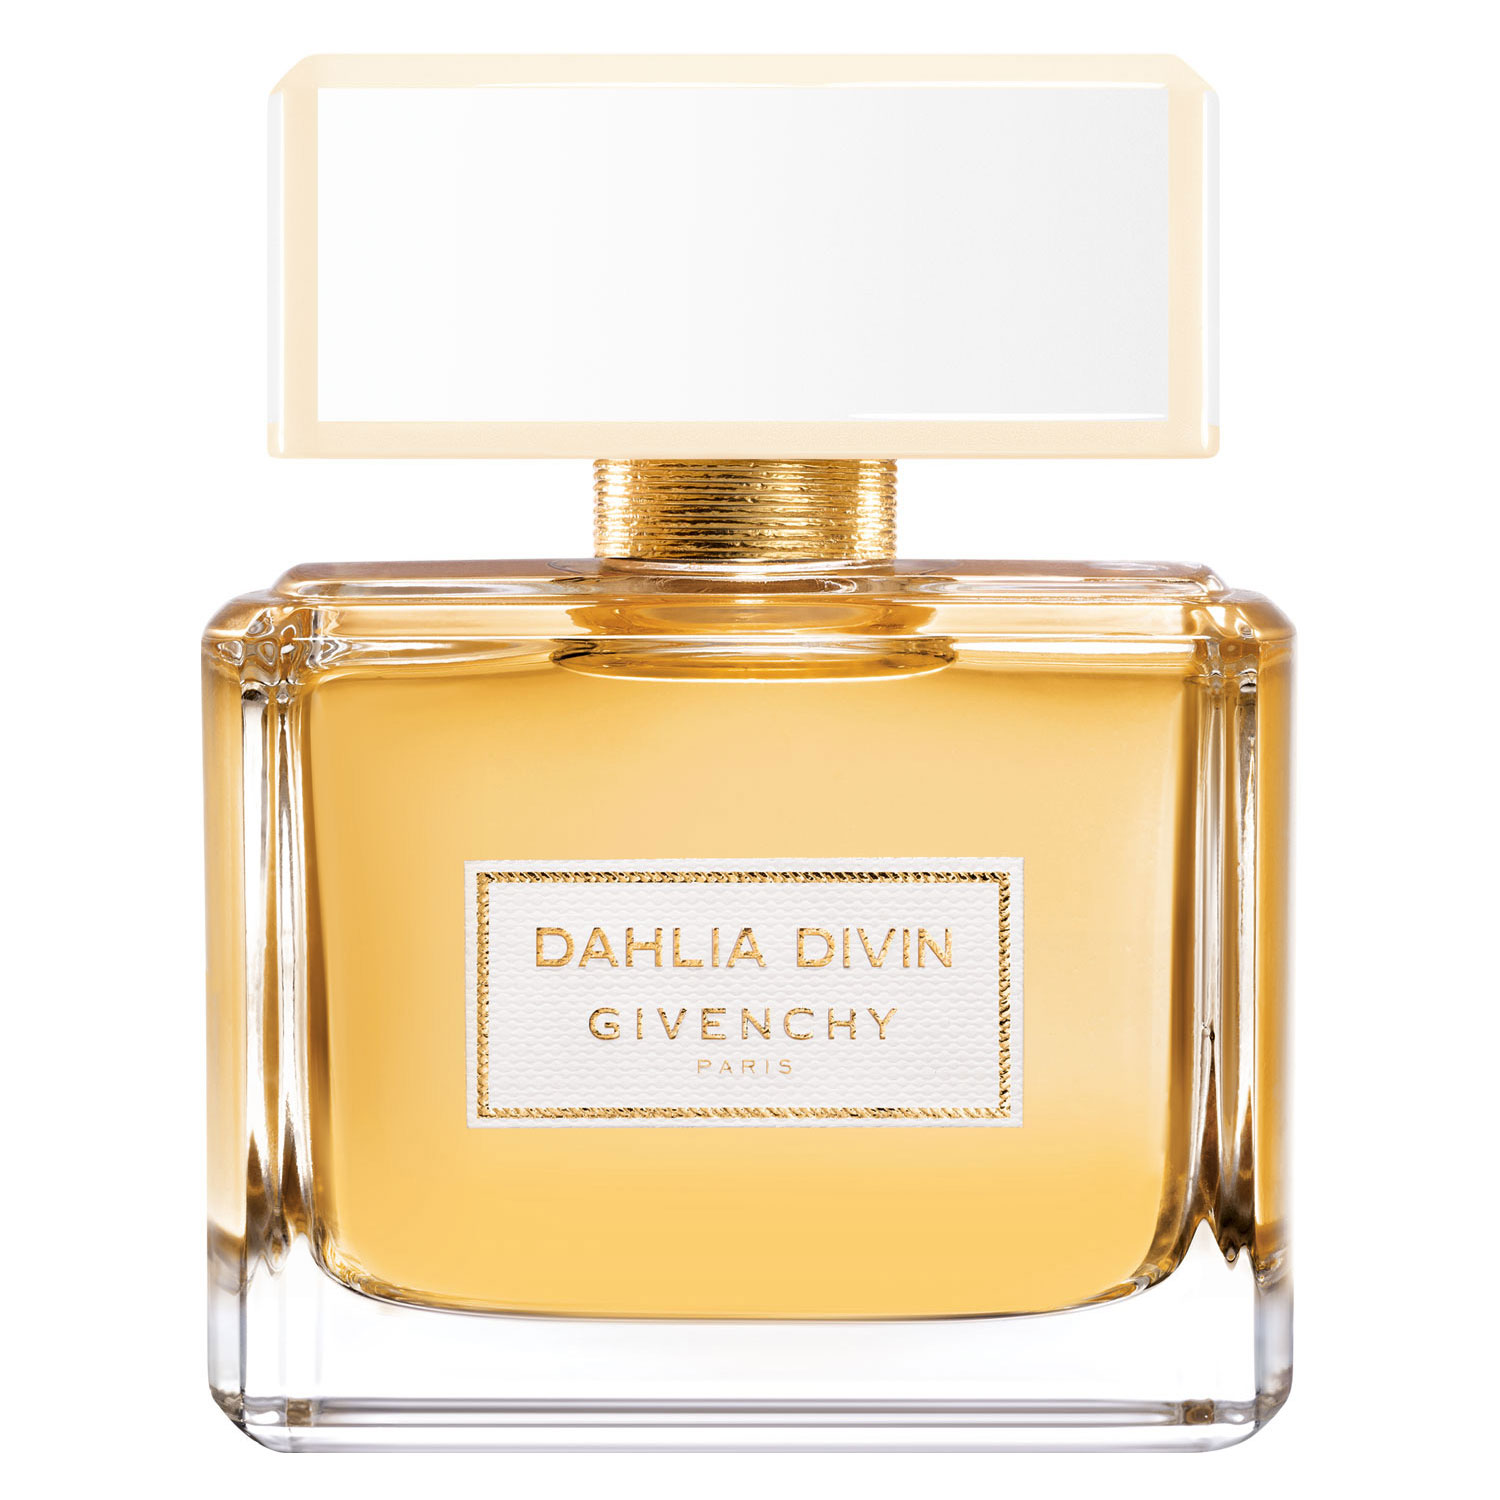 Givenchy Dahlia Divin - Perfumes, Colognes, Parfums, Scents resource guide - The Perfume Girl